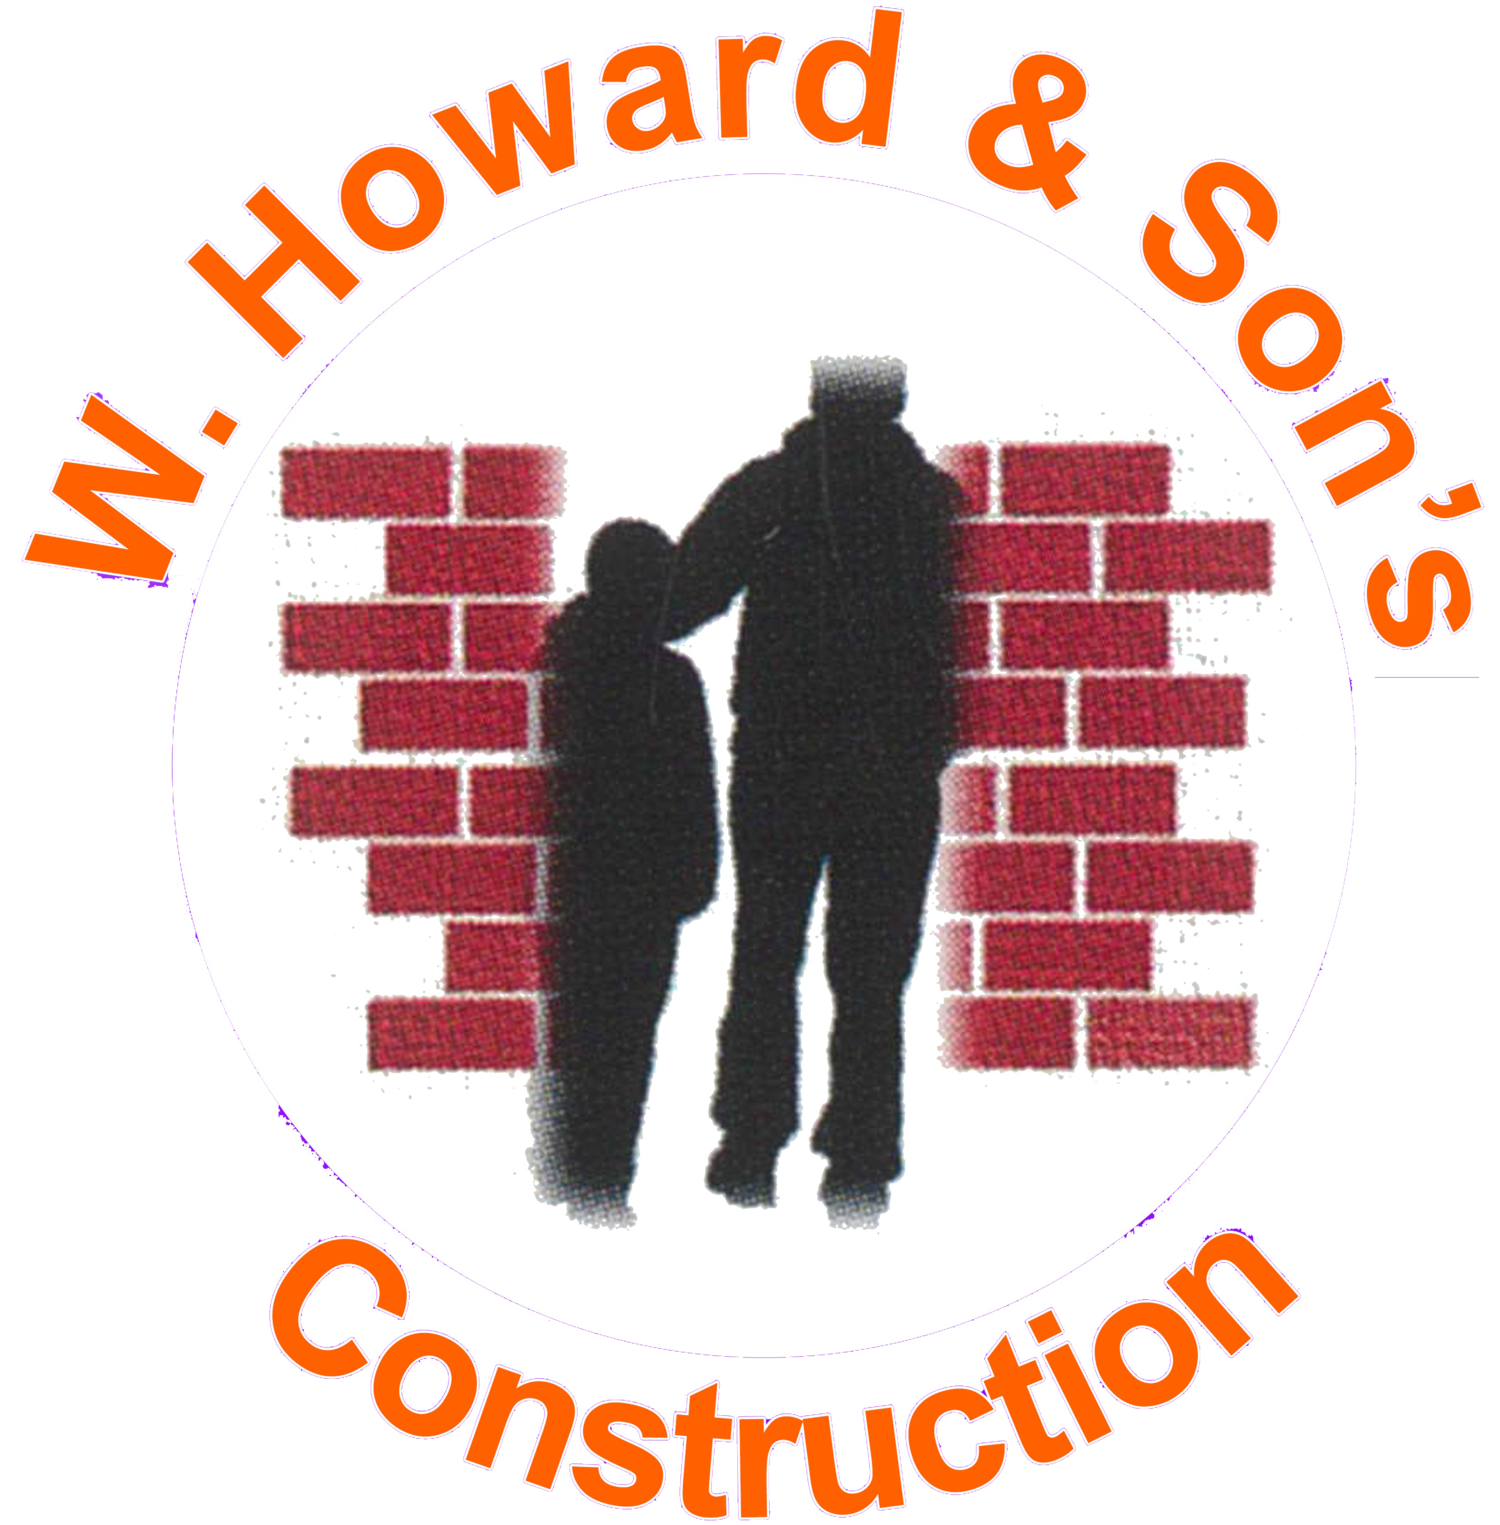 Willie Howard and Sons Construction